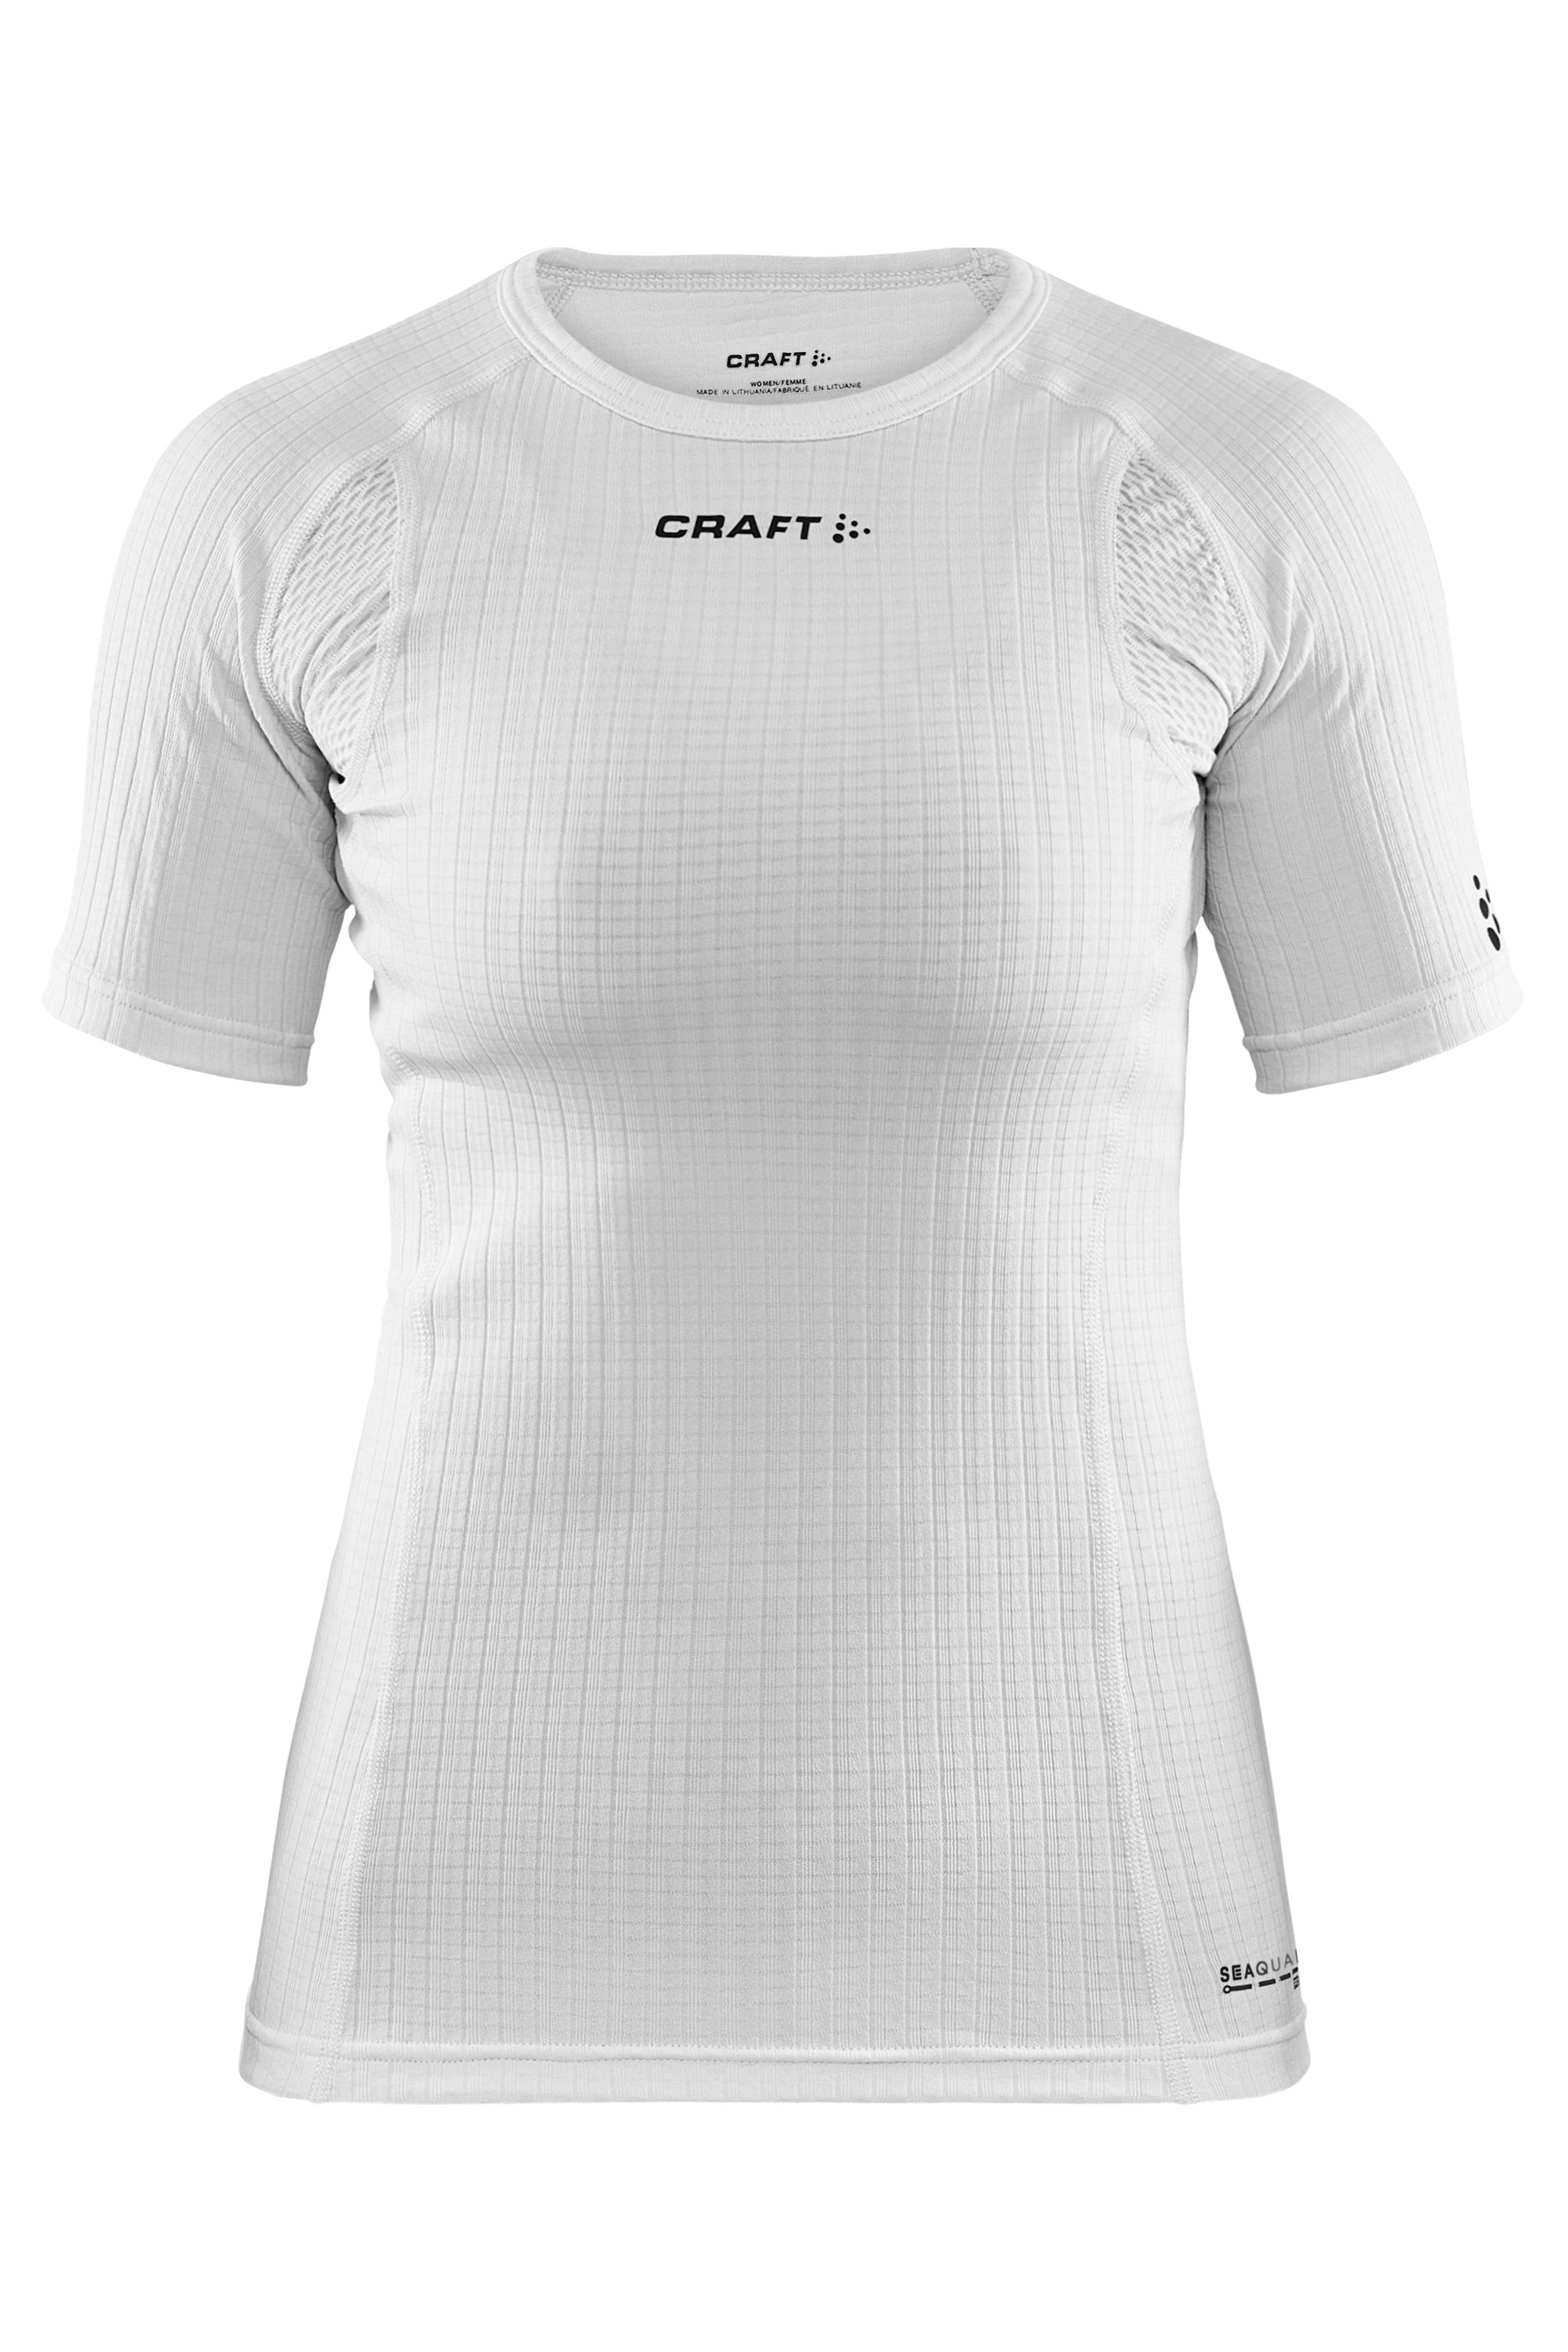 Active Extreme X Womens Baselayer T-Shirt